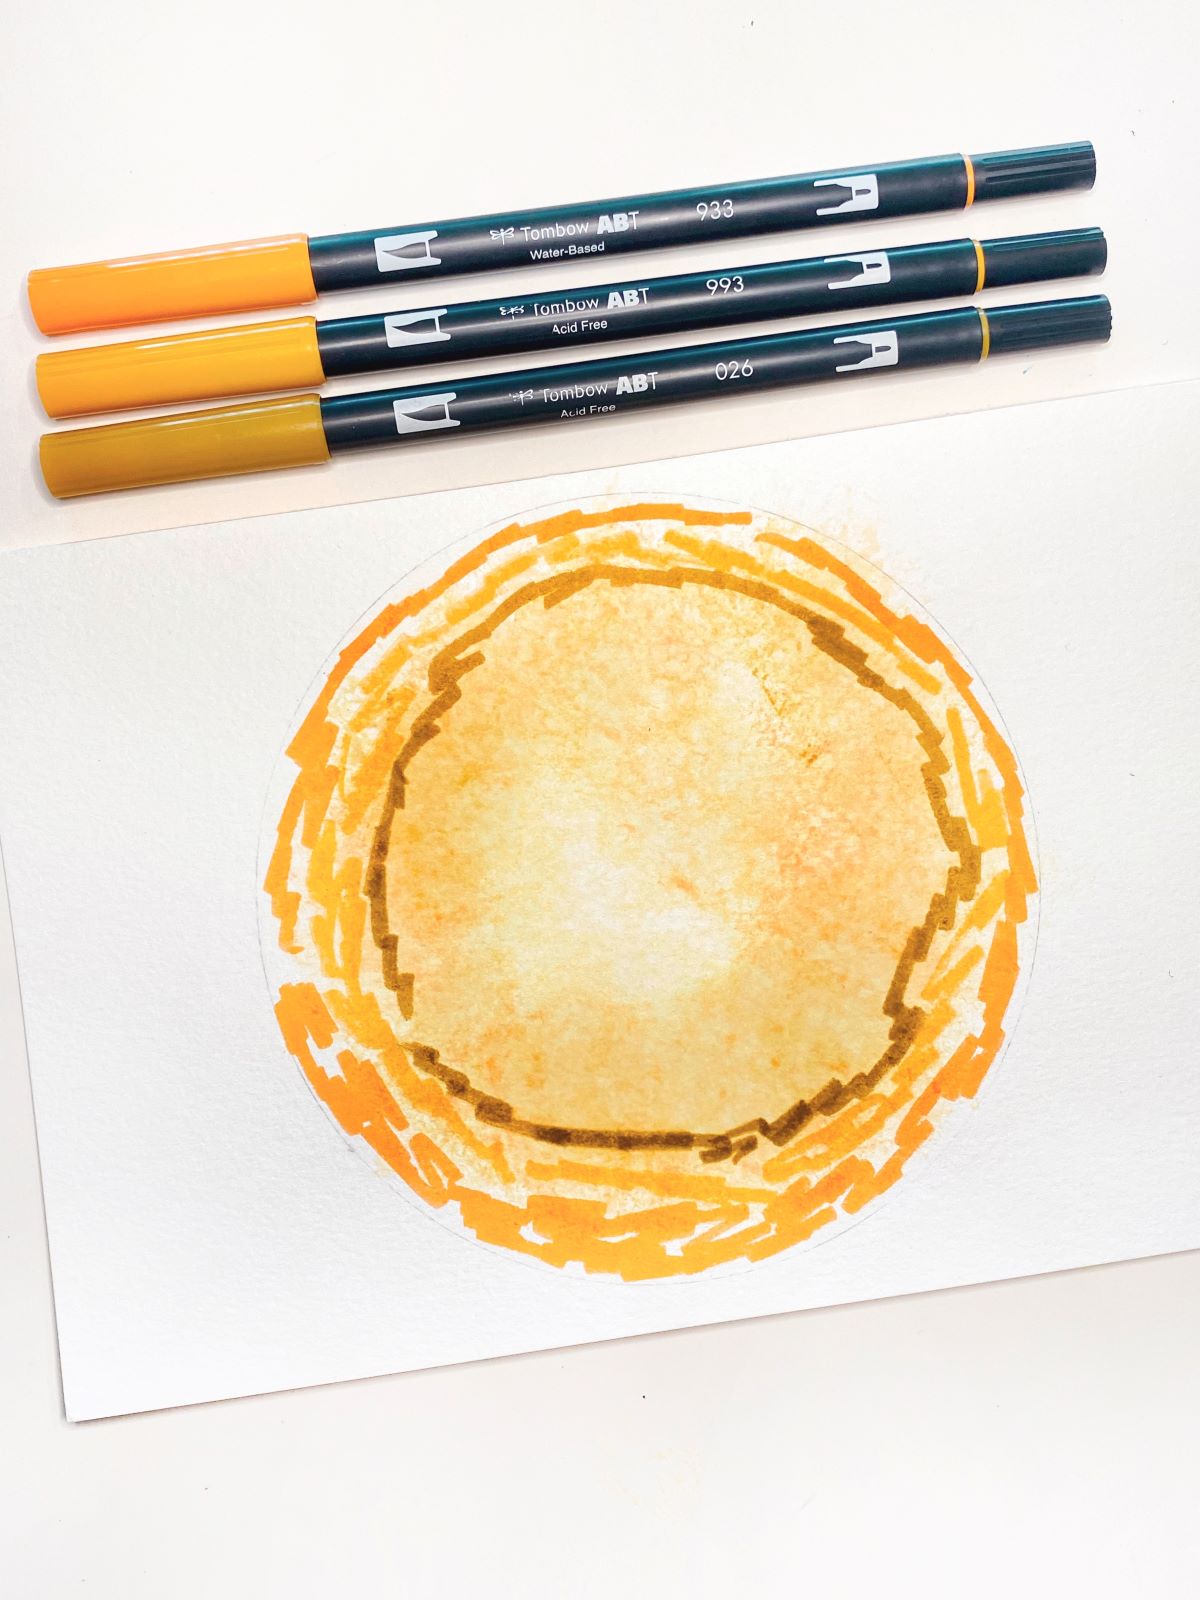 Sponge Paint a Galaxy with Tombow - Mandy Faucher